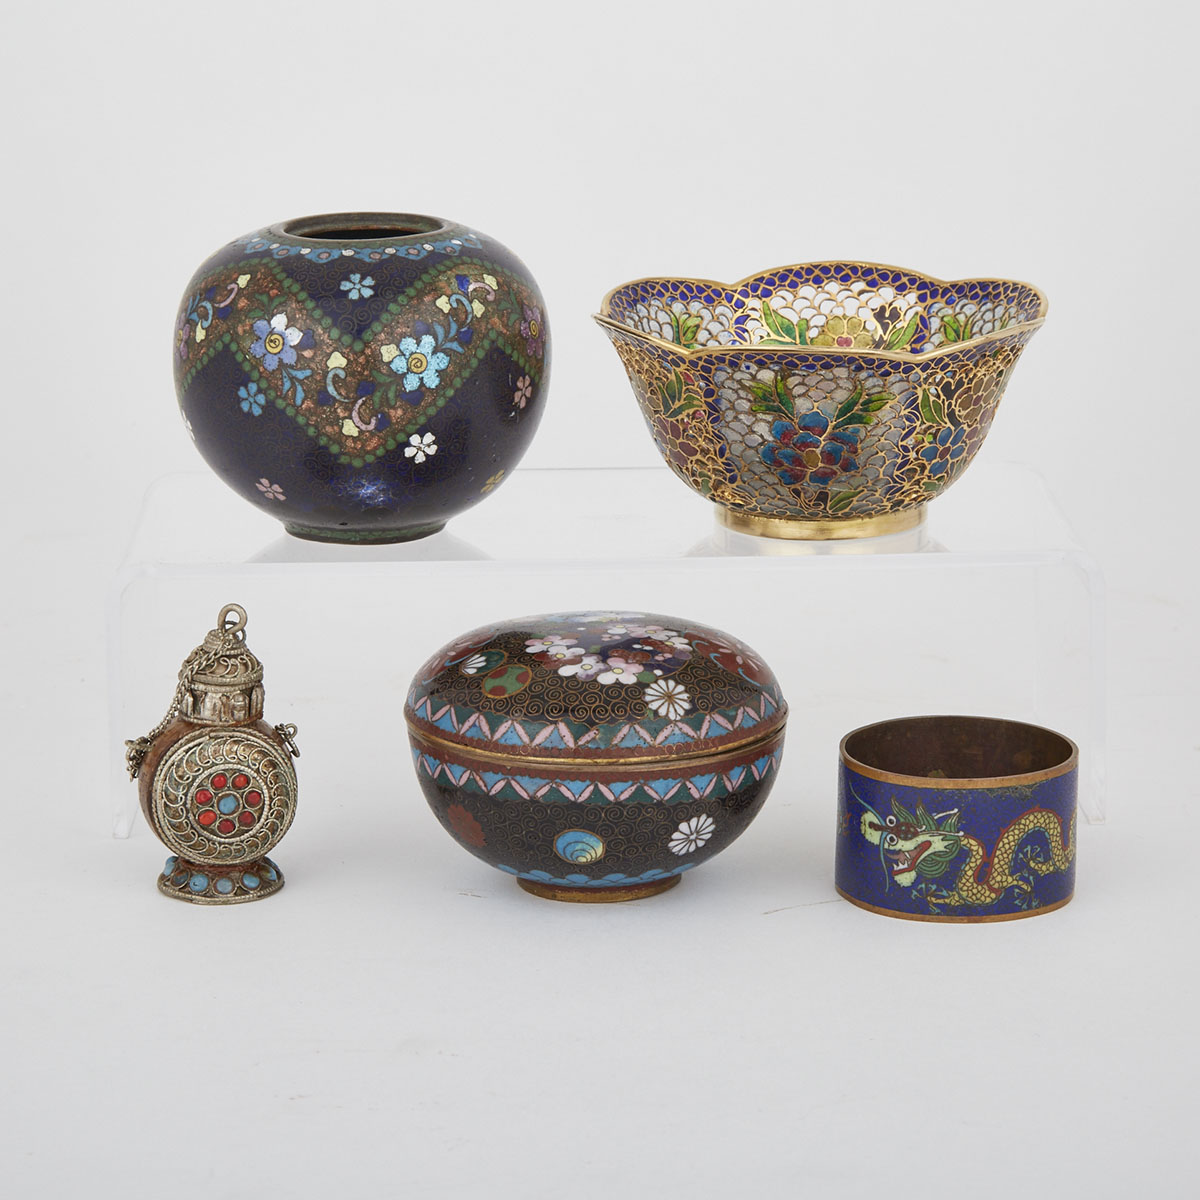 Five Pieces of Cloisonne, Early 20th Century and Later